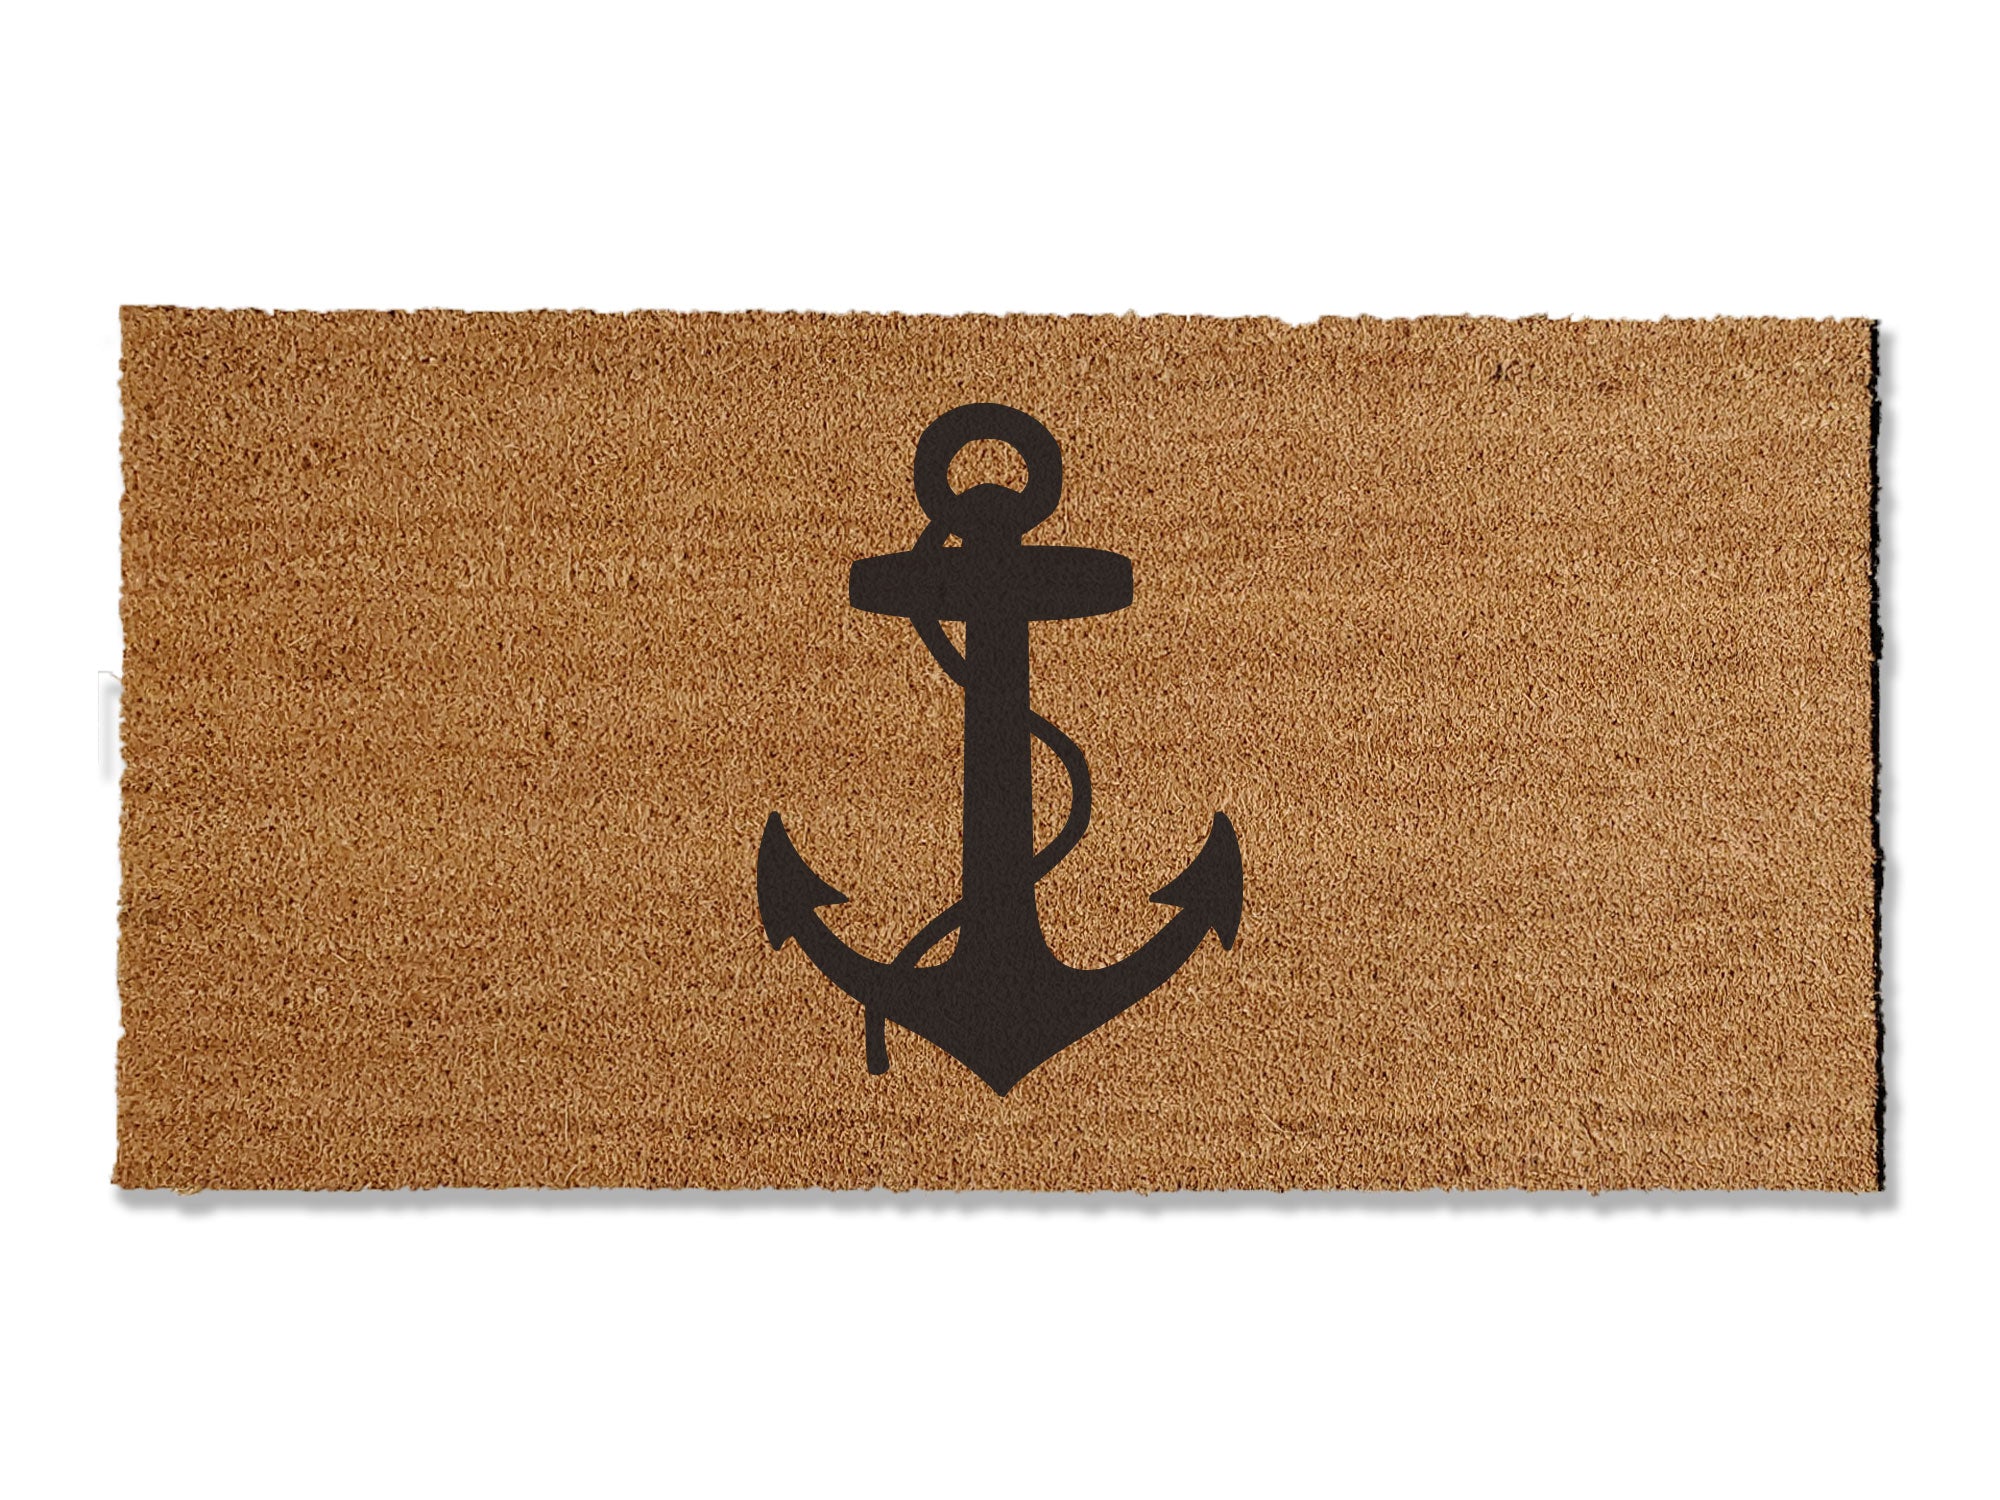 A coir doormat that is 24 inches by 48 inches and has a black anchor printed on it.